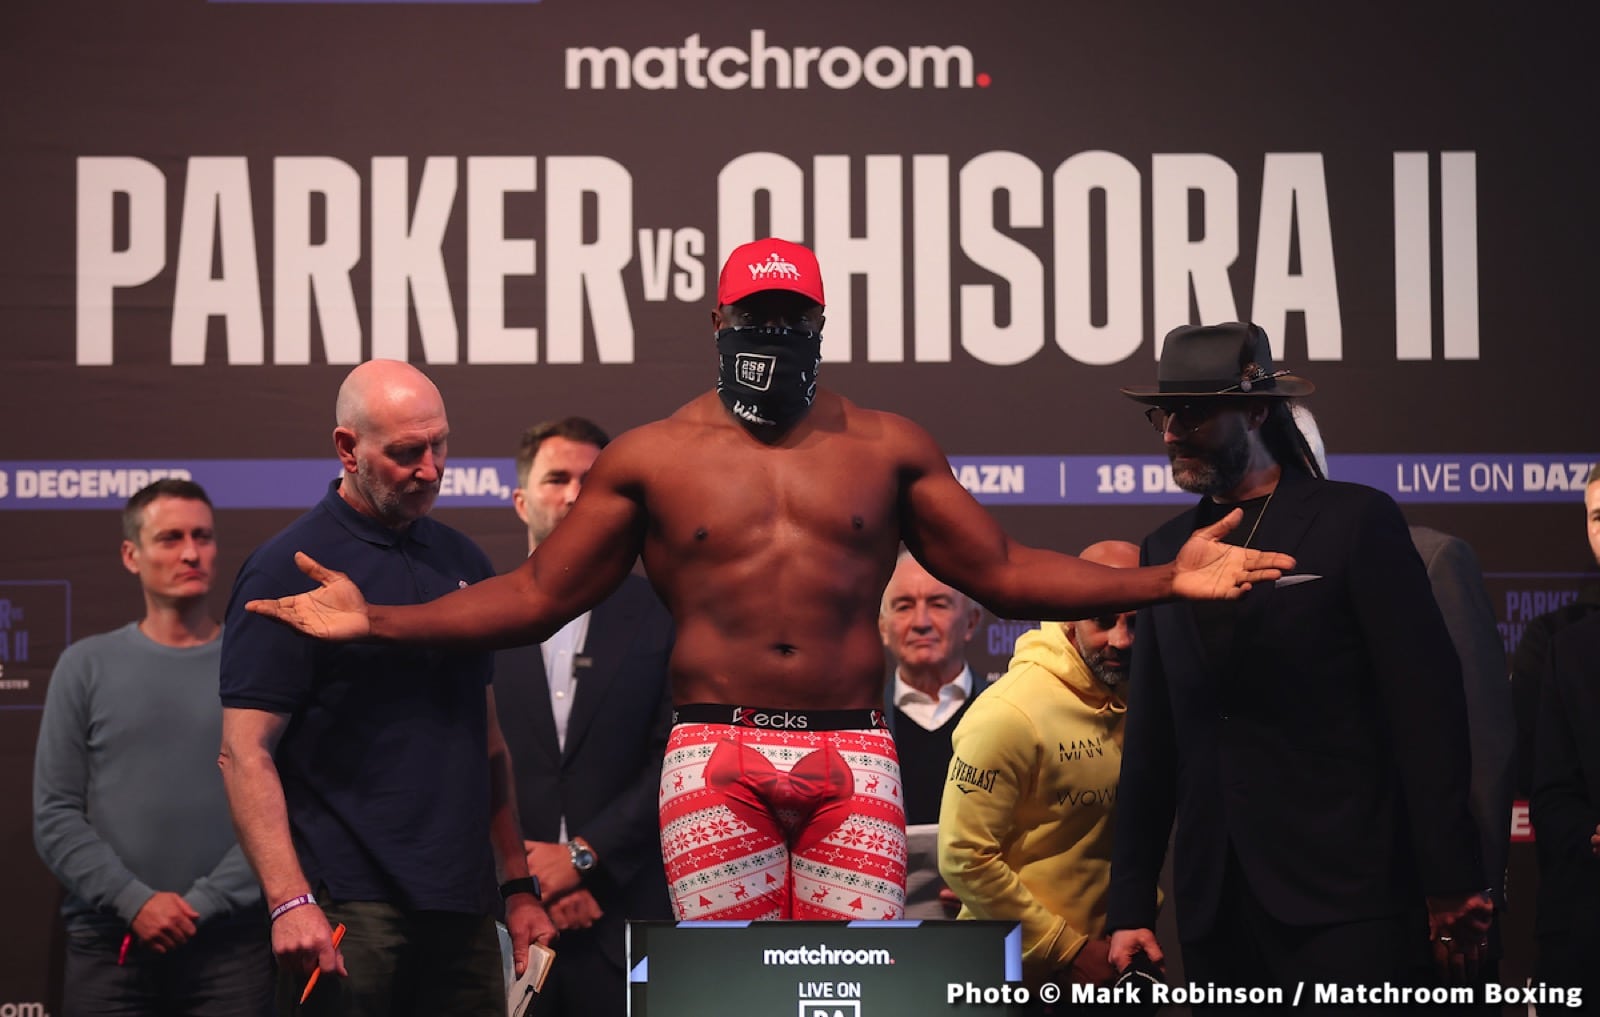 Image: Joseph Parker bulks up to 251, Dereck Chisora 248 1/2 - weigh-in results